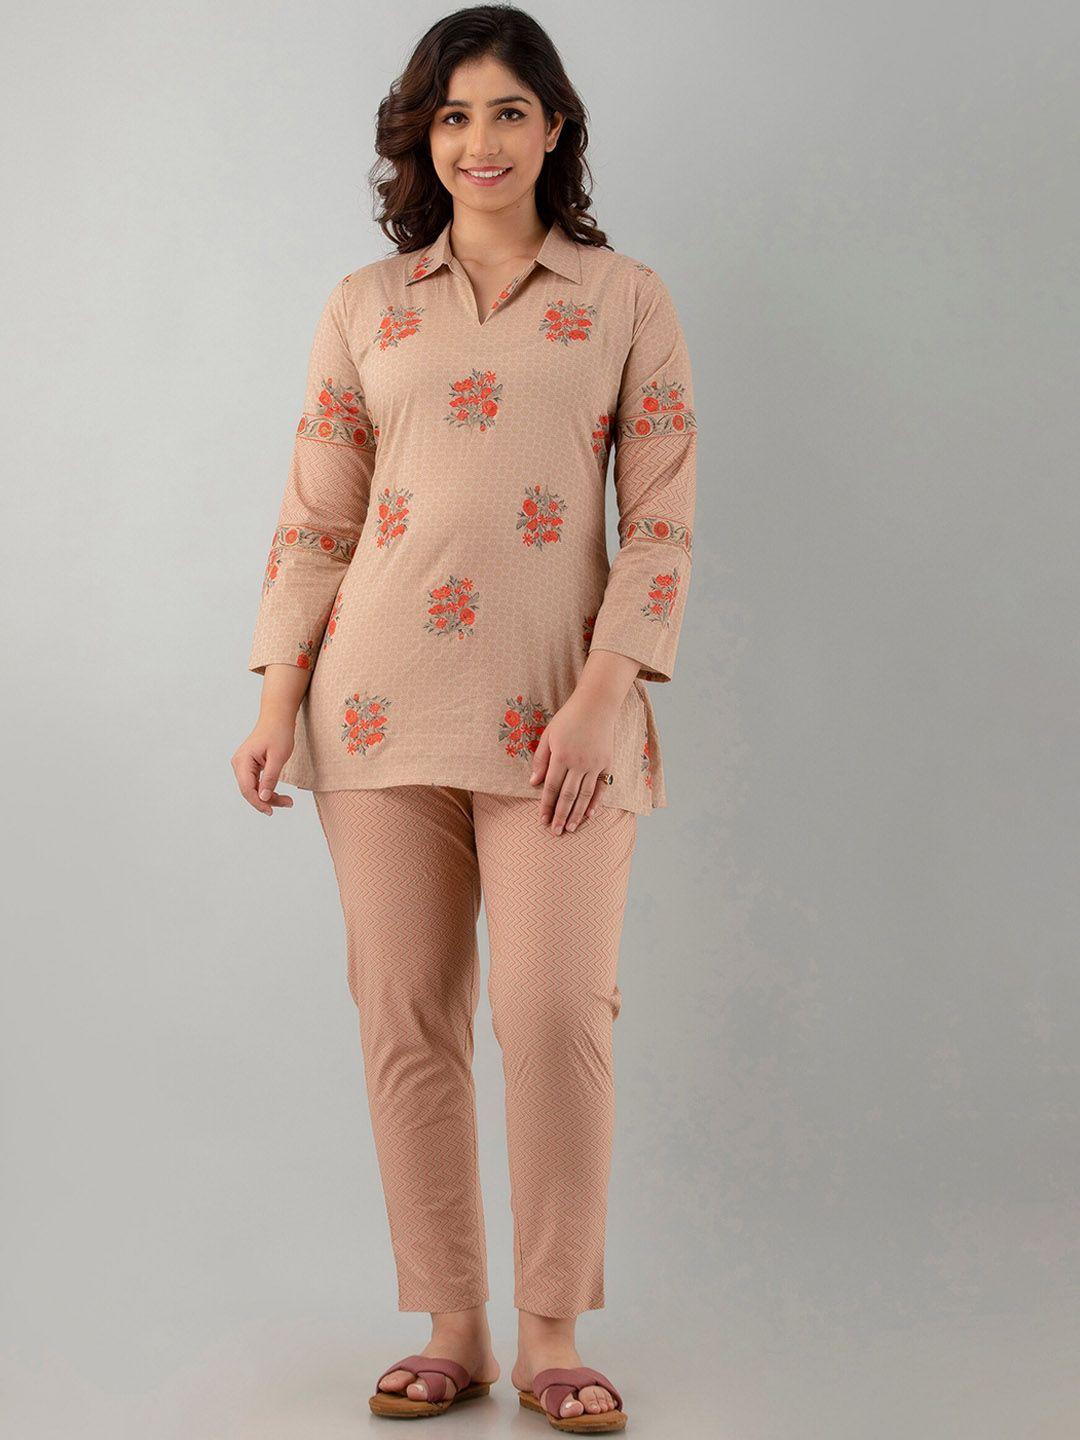 ckm-women-floral-printed-pure-cotton-shirt-collar-night-suit